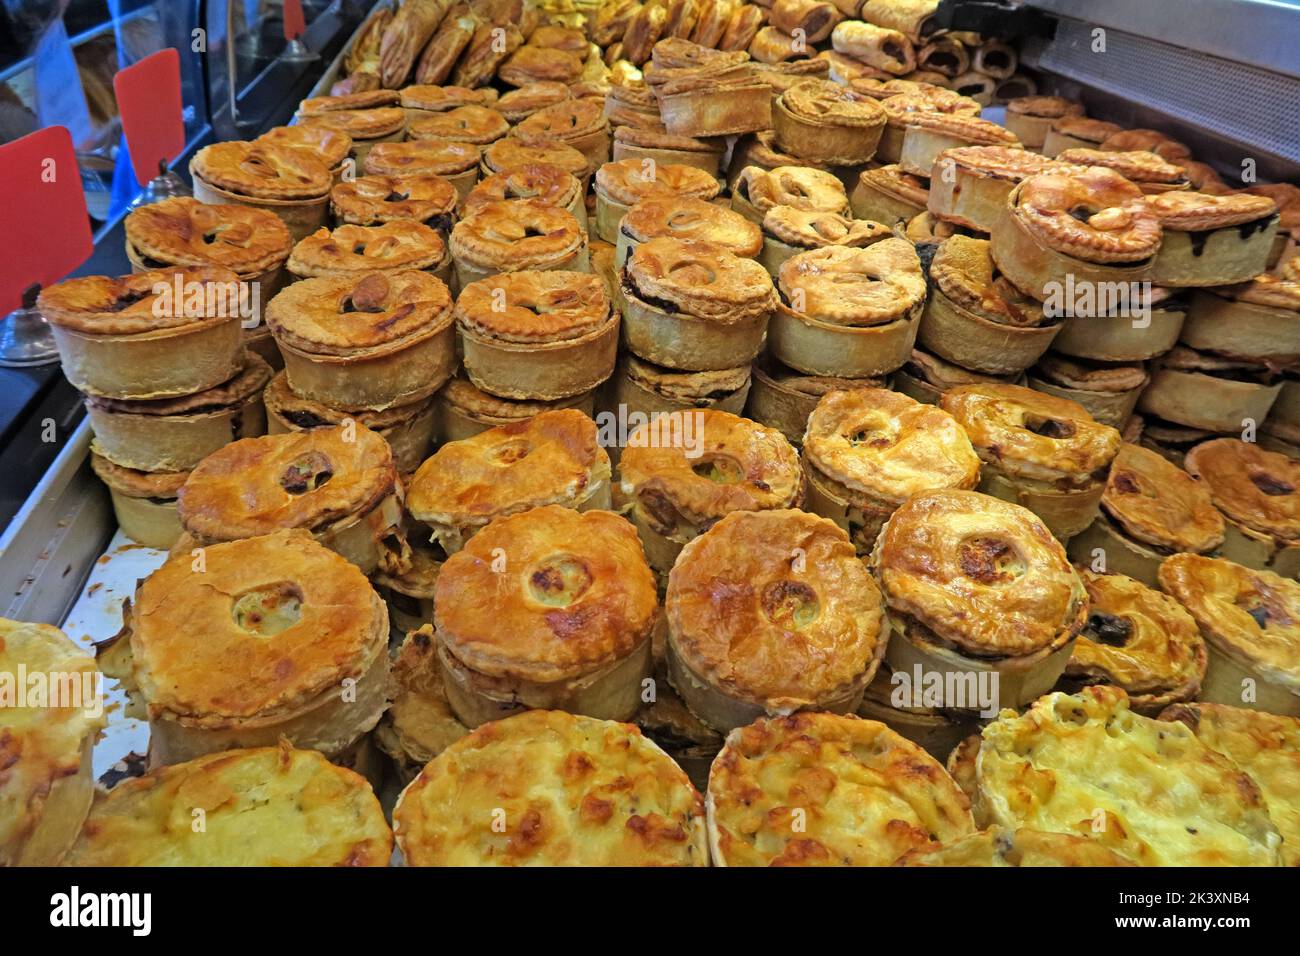 Pies at a bakers shop, piled up for retail purchase, Callandar, Scotland, UK, FK17 8AA Stock Photo